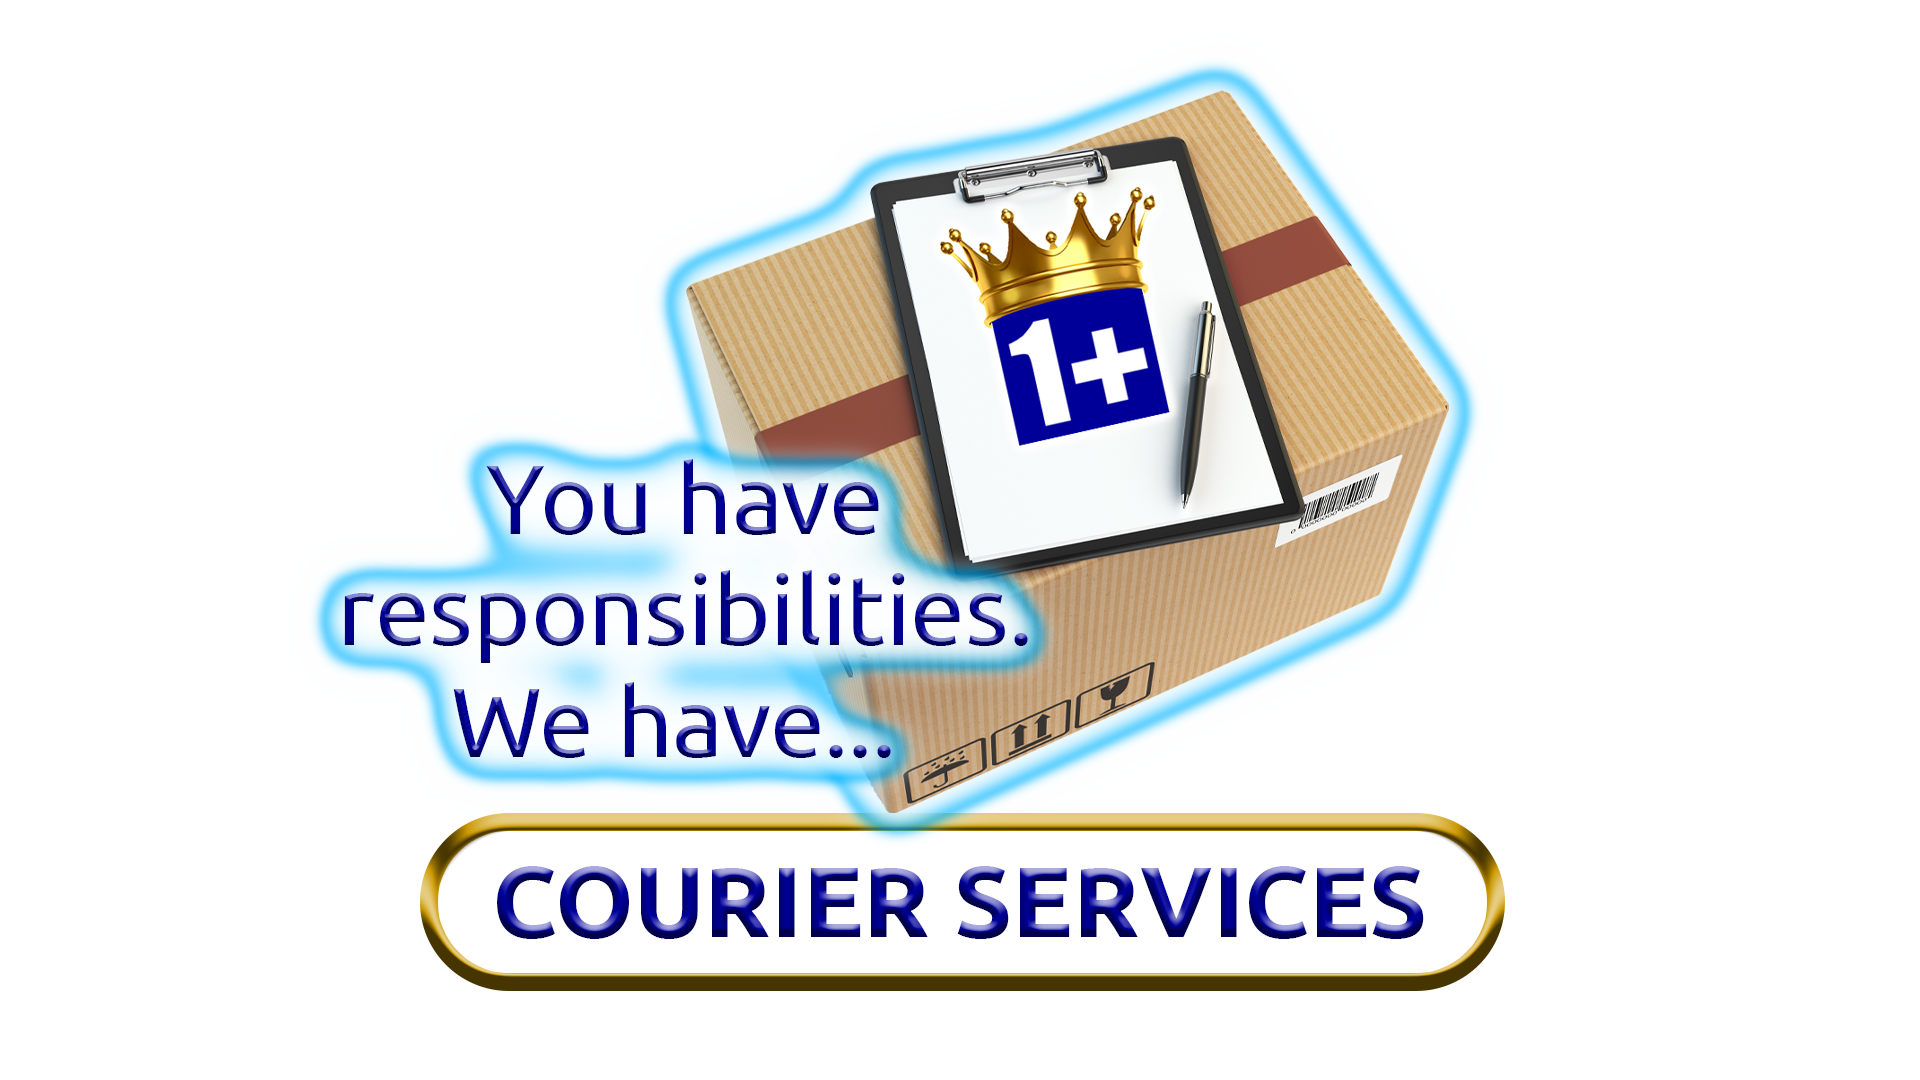 Masterful Couriers Services By 1+Movers - Moving - Movers - Move - Houston Texas - Nassau Bay Texas - Seabrook Texas - Kemah Texas 8.2